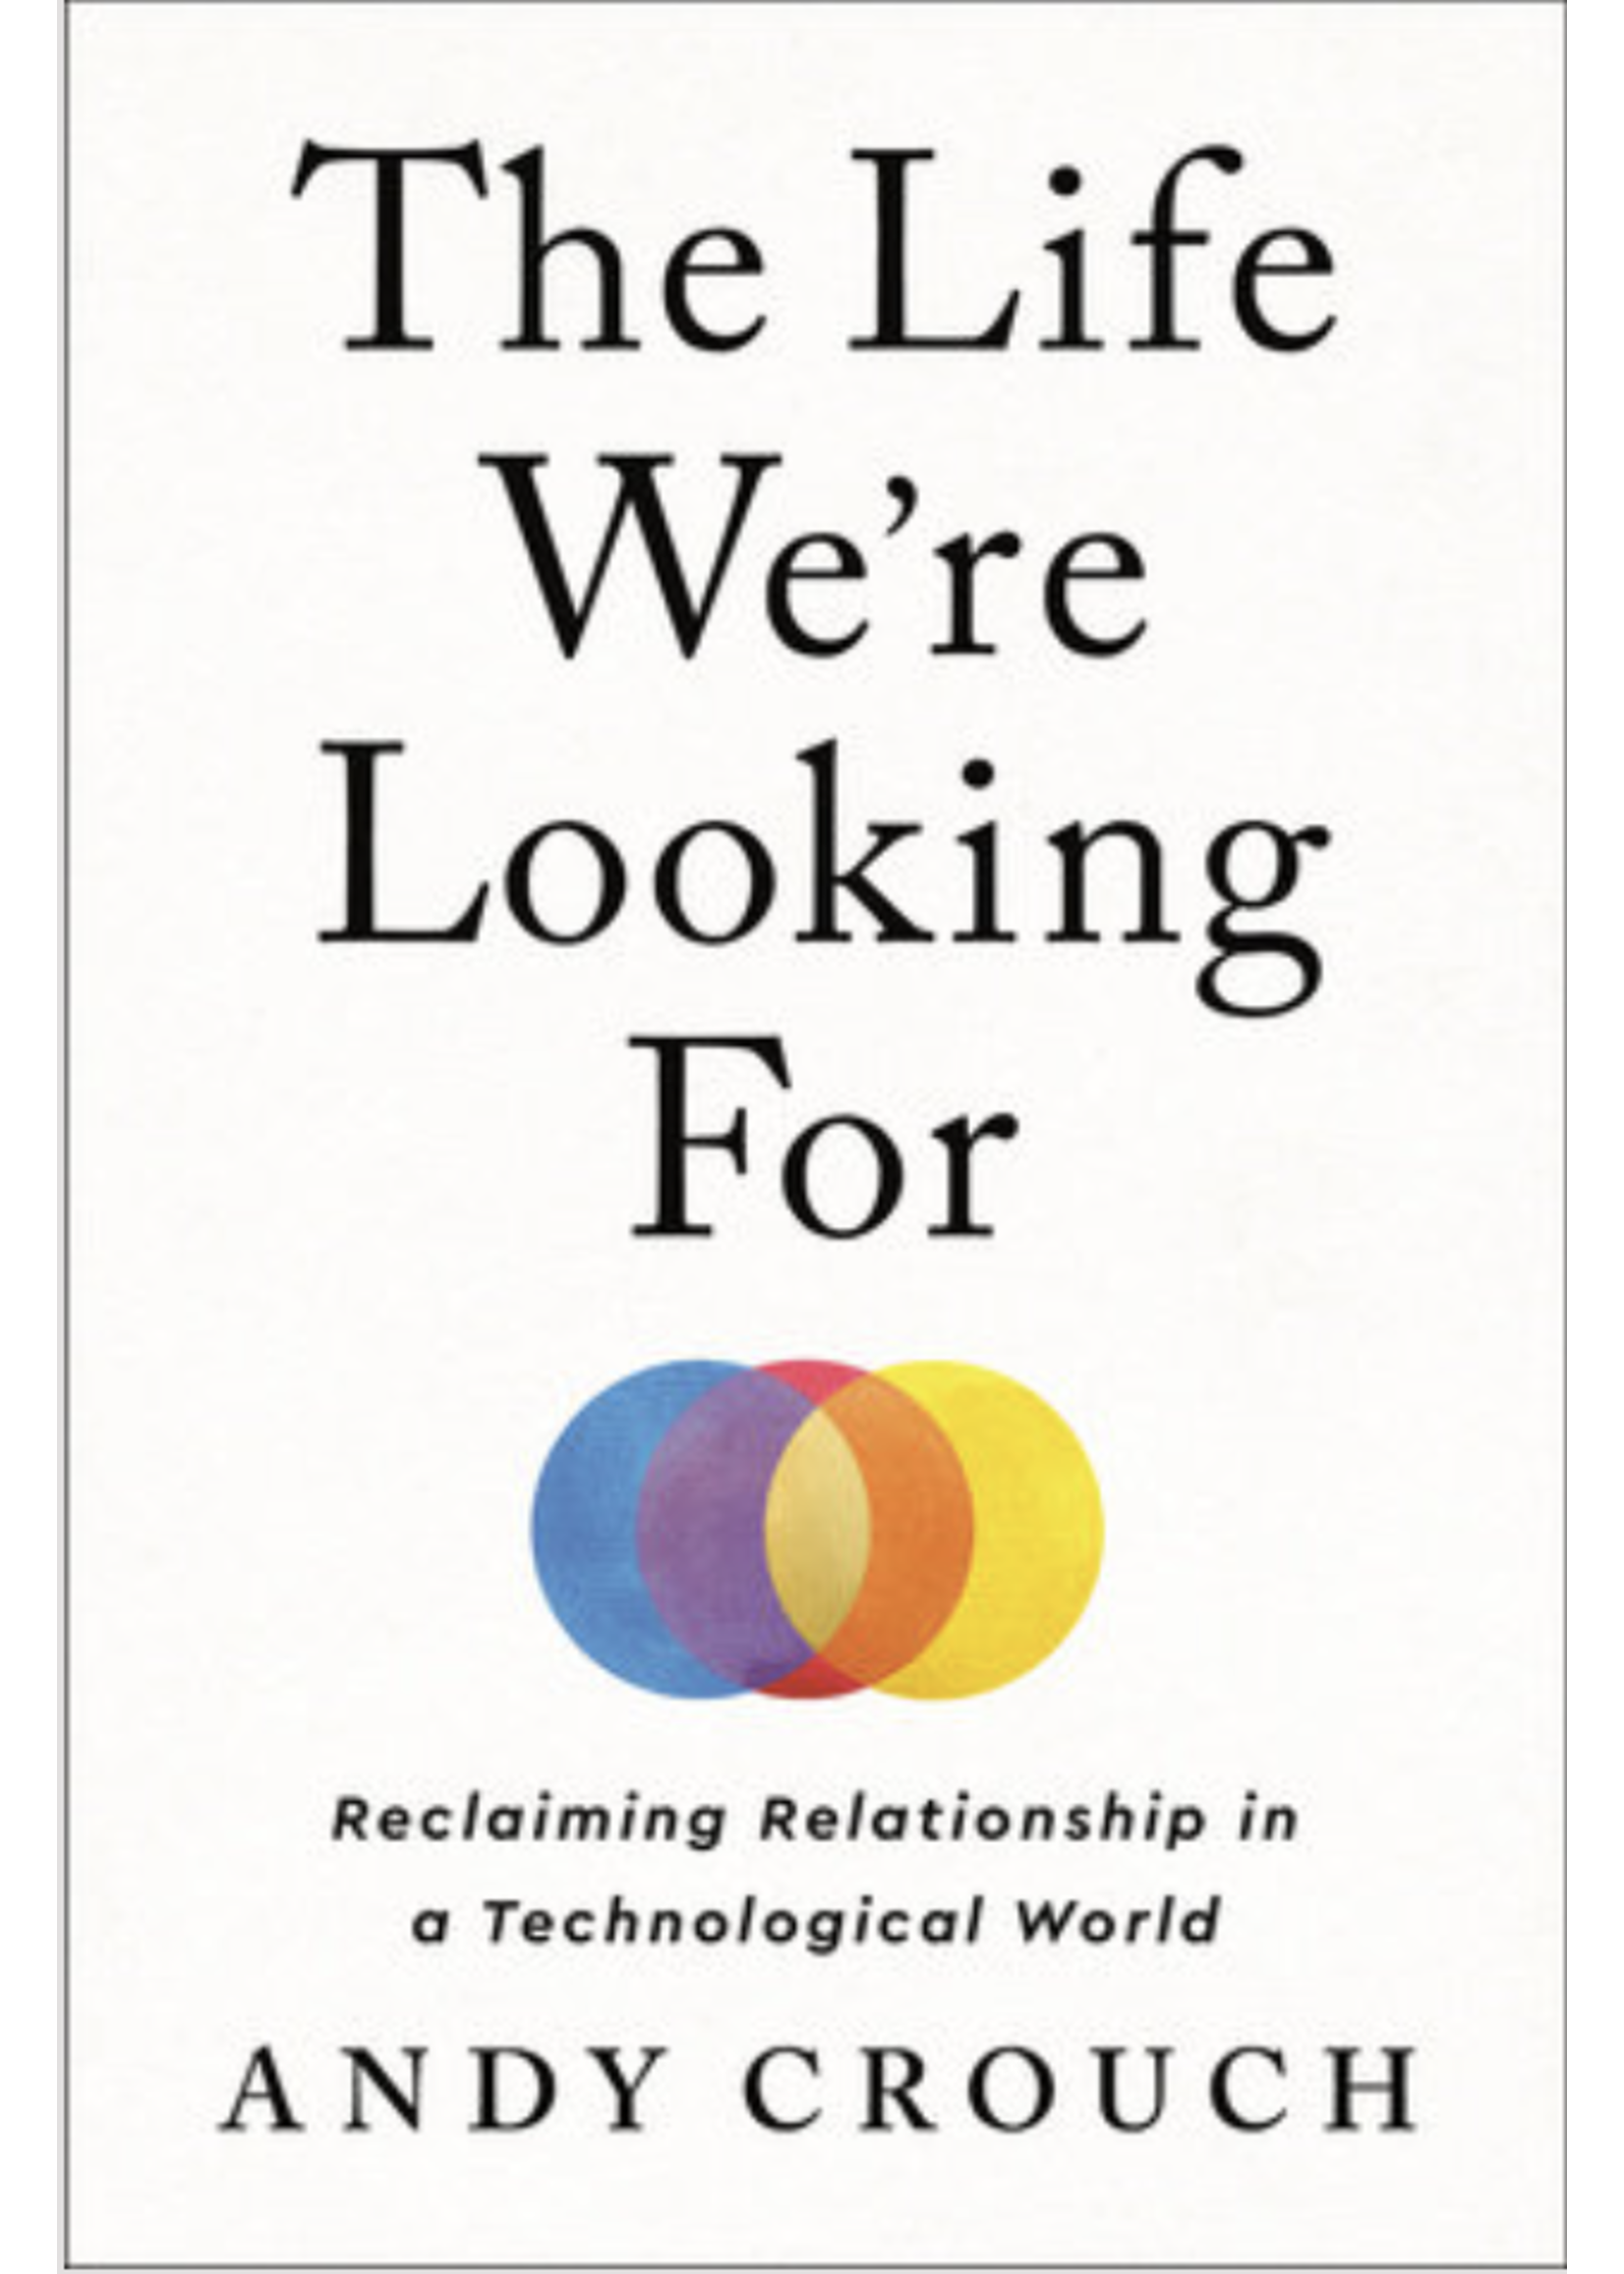 The Life We're Looking for: Reclaiming Relationship in a Technological World by Andy Crouch